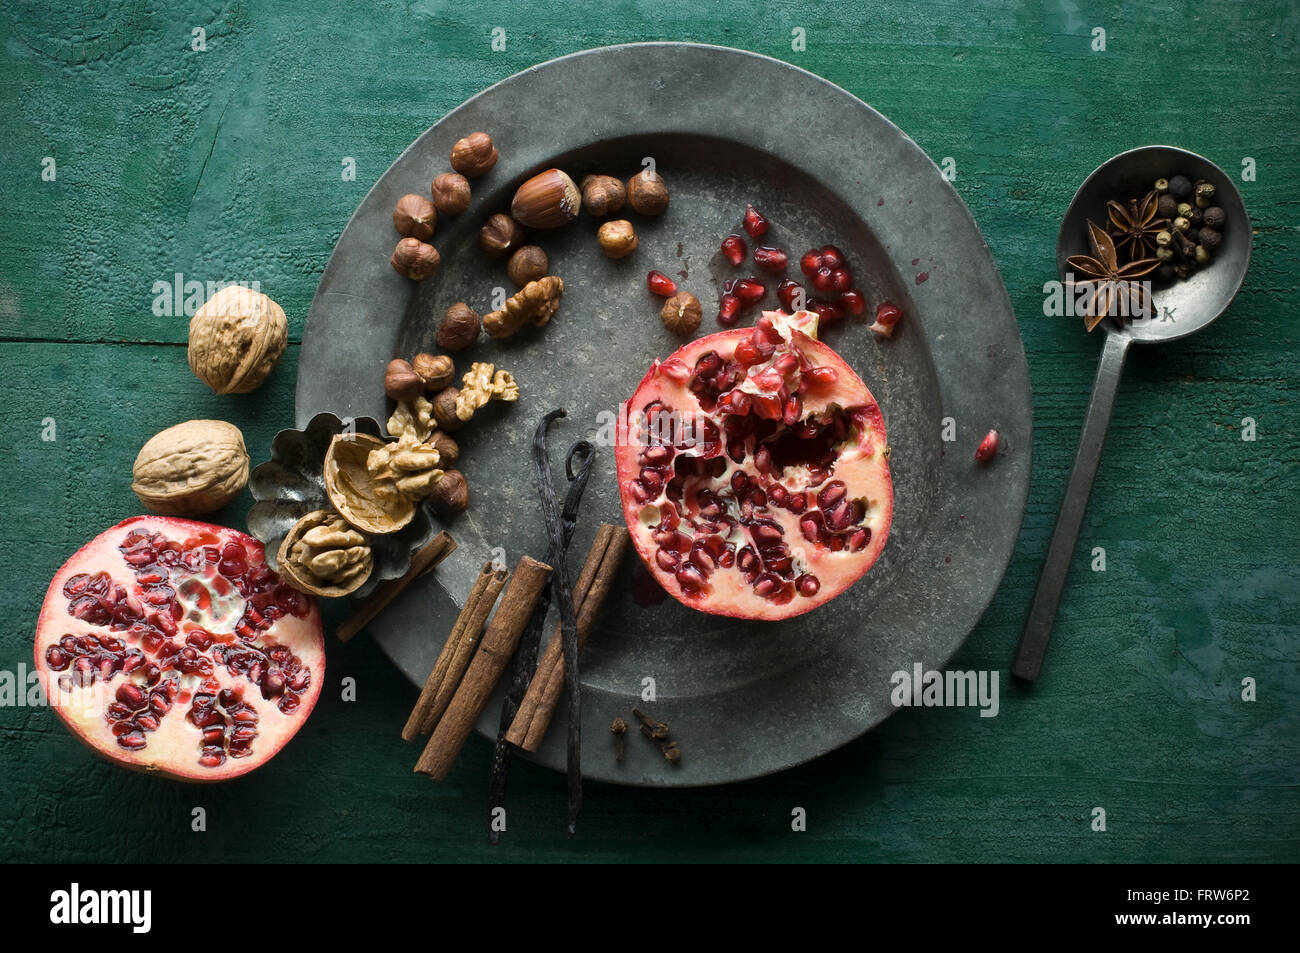 Two halves of pomegranate, different spices and nuts on tin plate Stock Photo